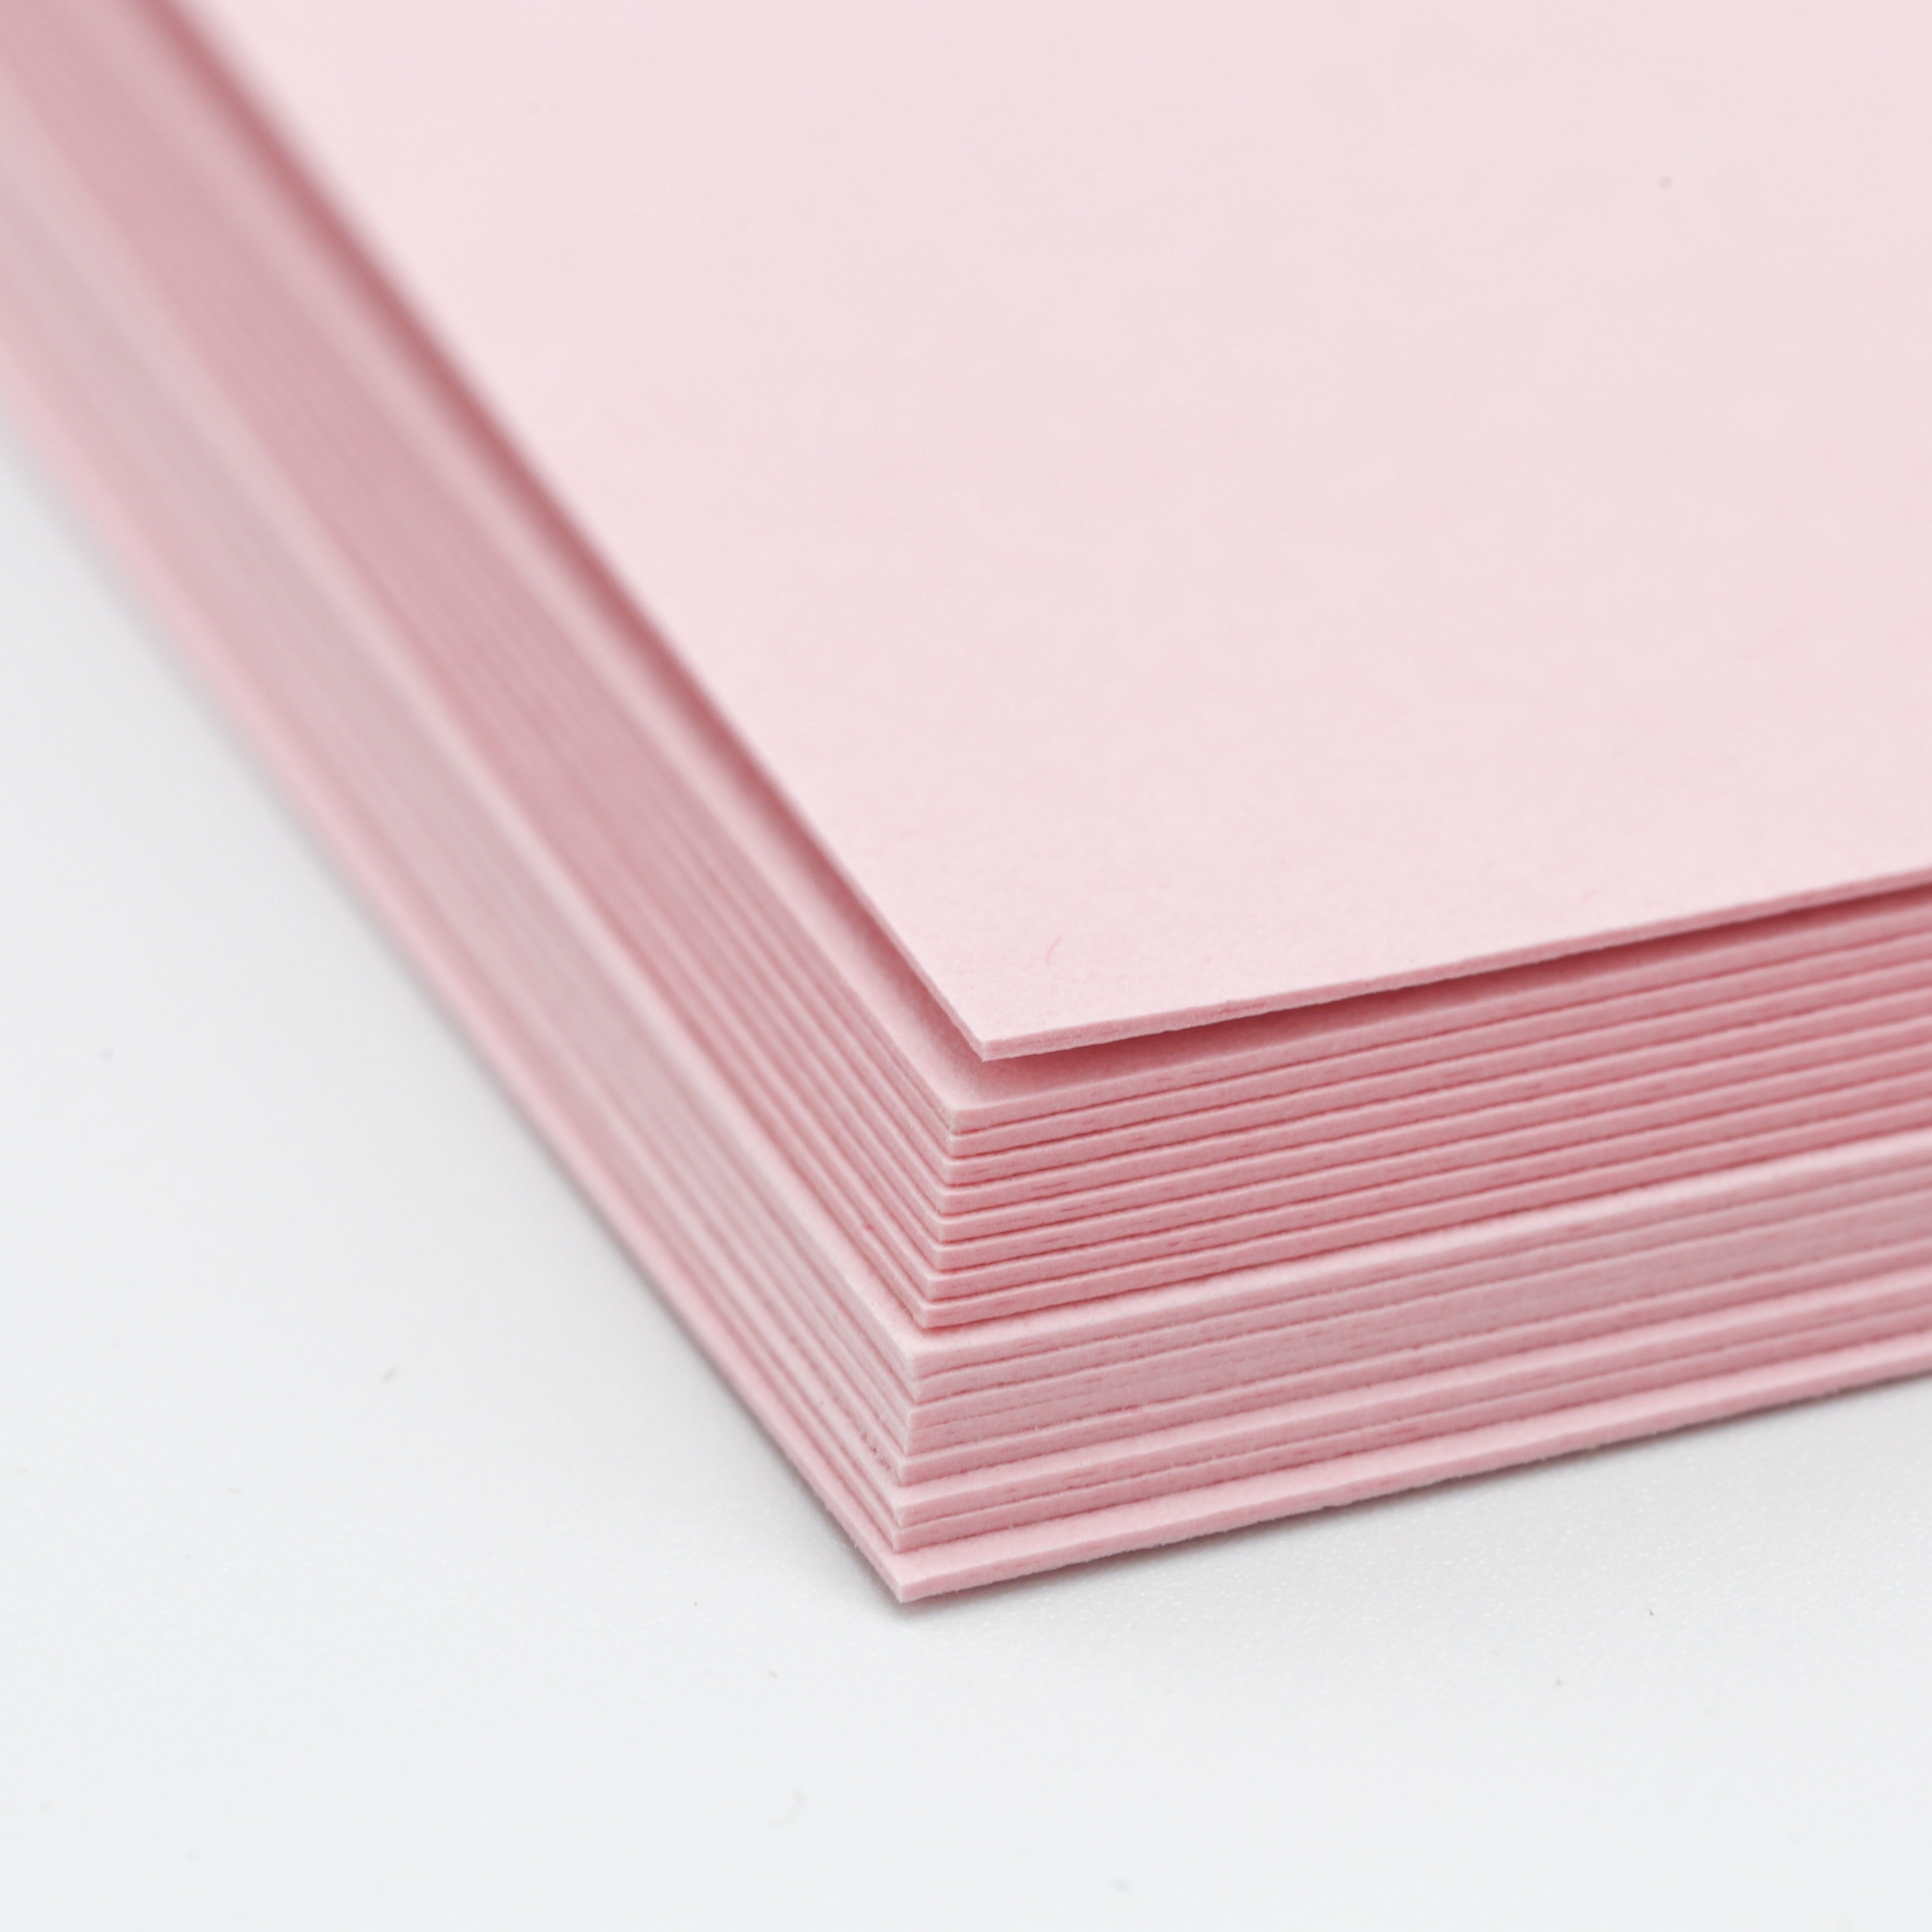 Cardstock Warehouse Cotton Candy Pink Cardstock Paper - 85 x 11 inch 65 lb Cover -50 Sheets from Cardstock Warehouse